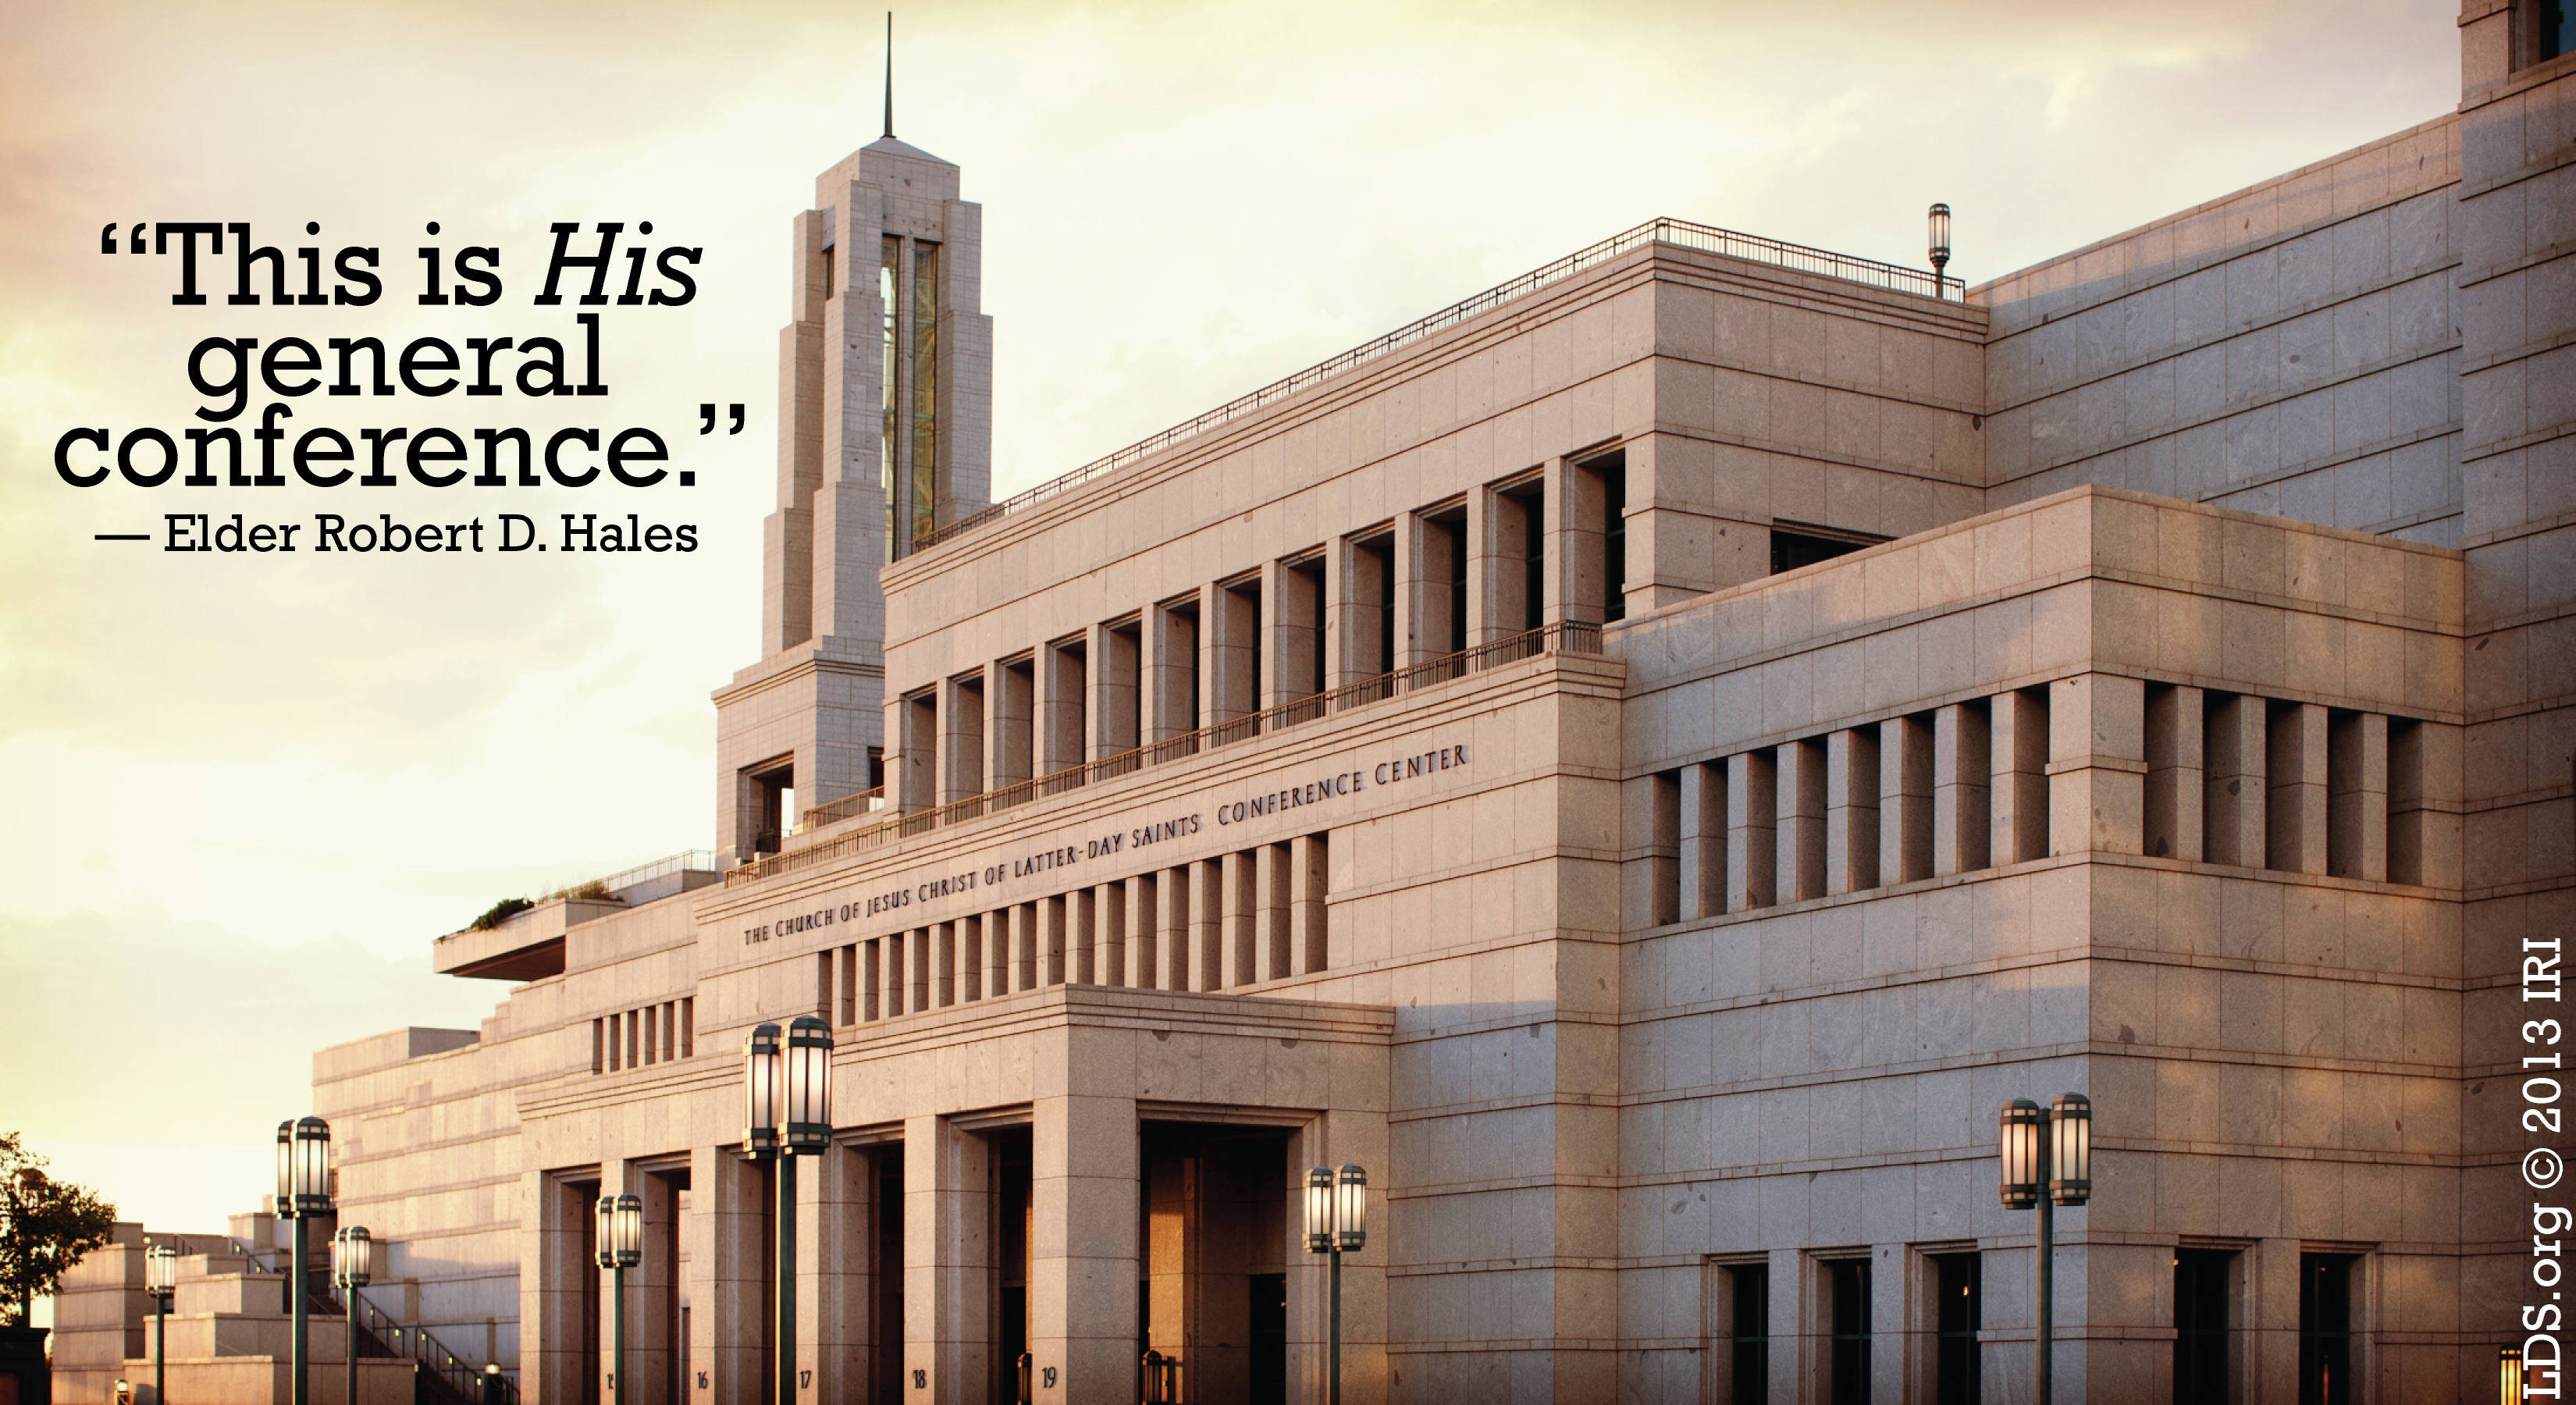 An image of the Conference Center, coupled with a quote by Elder Robert D. Hales: “This is His general conference.”